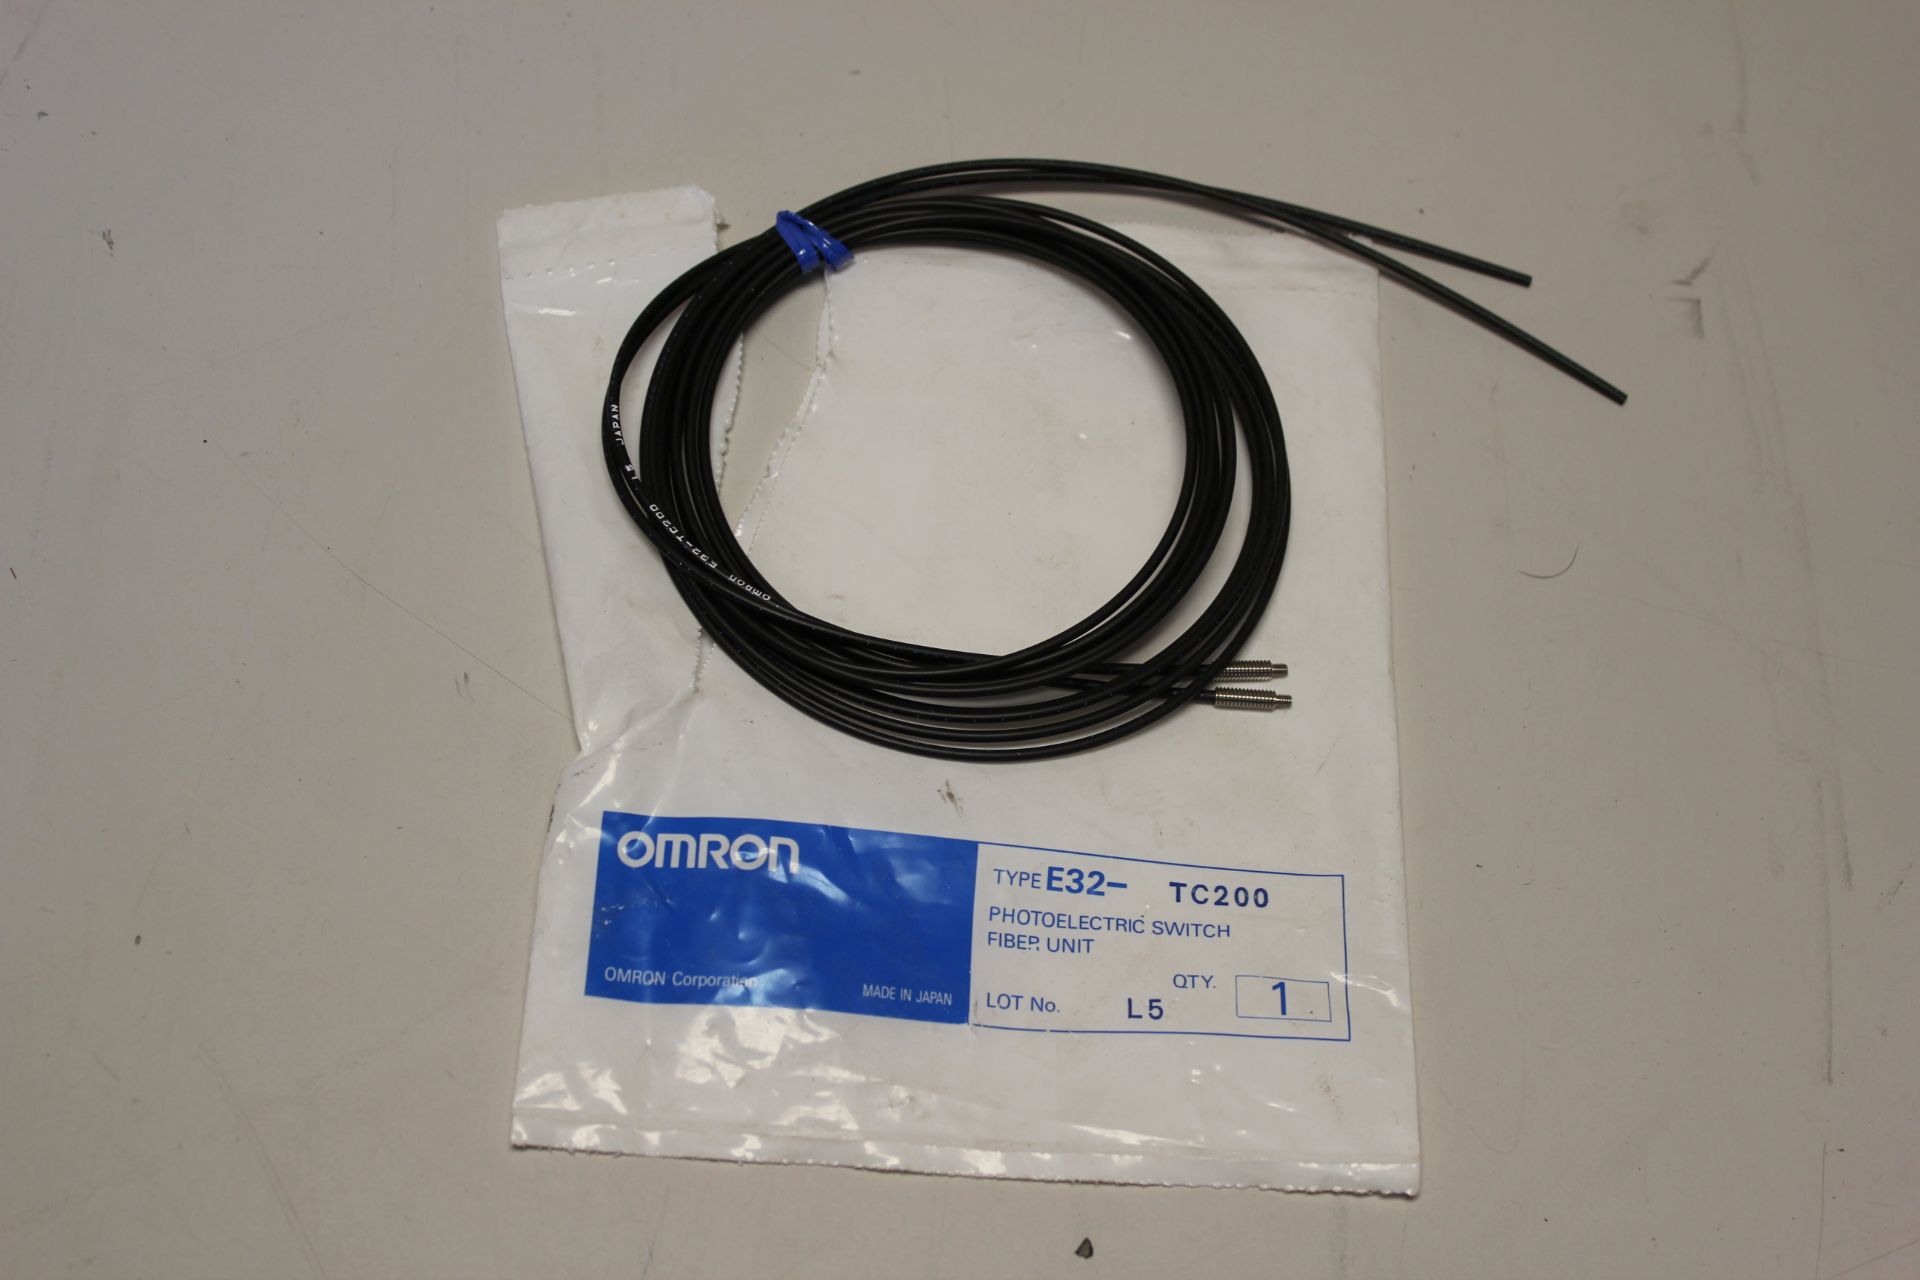 NEW OMRON PHOTOELECTRIC SWITCH FIBER UNIT